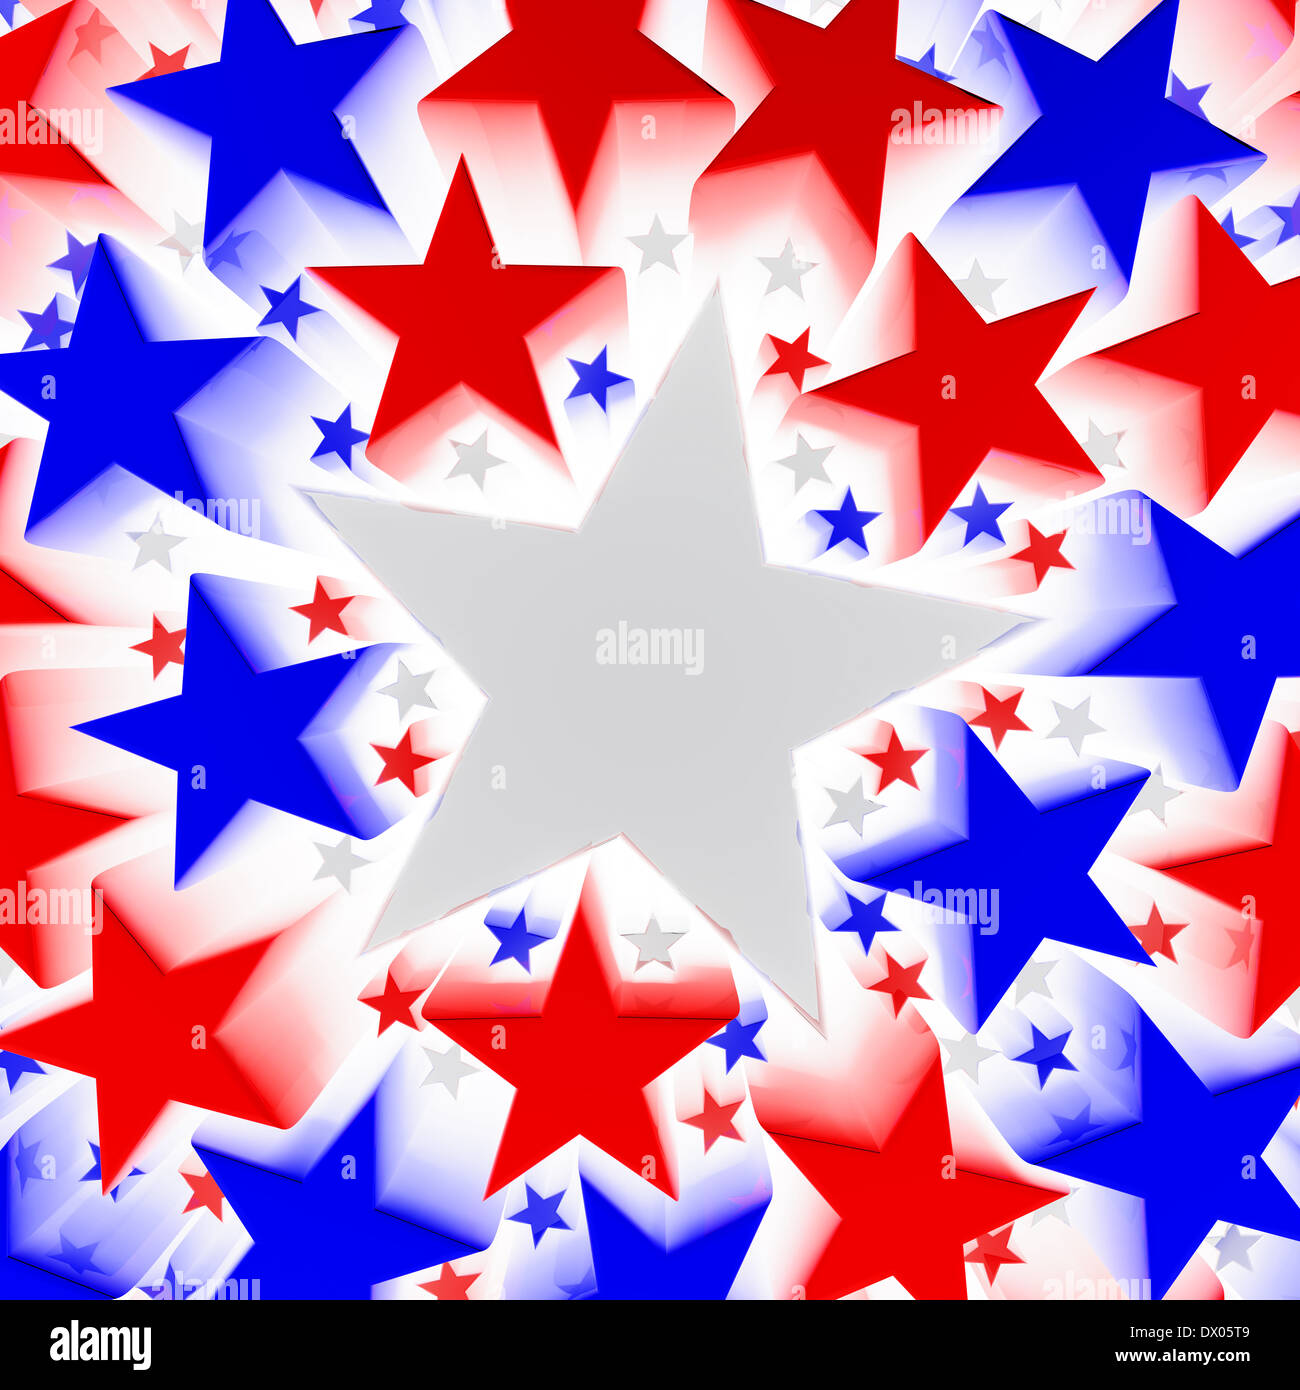 Red, white and blue stars Stock Photo